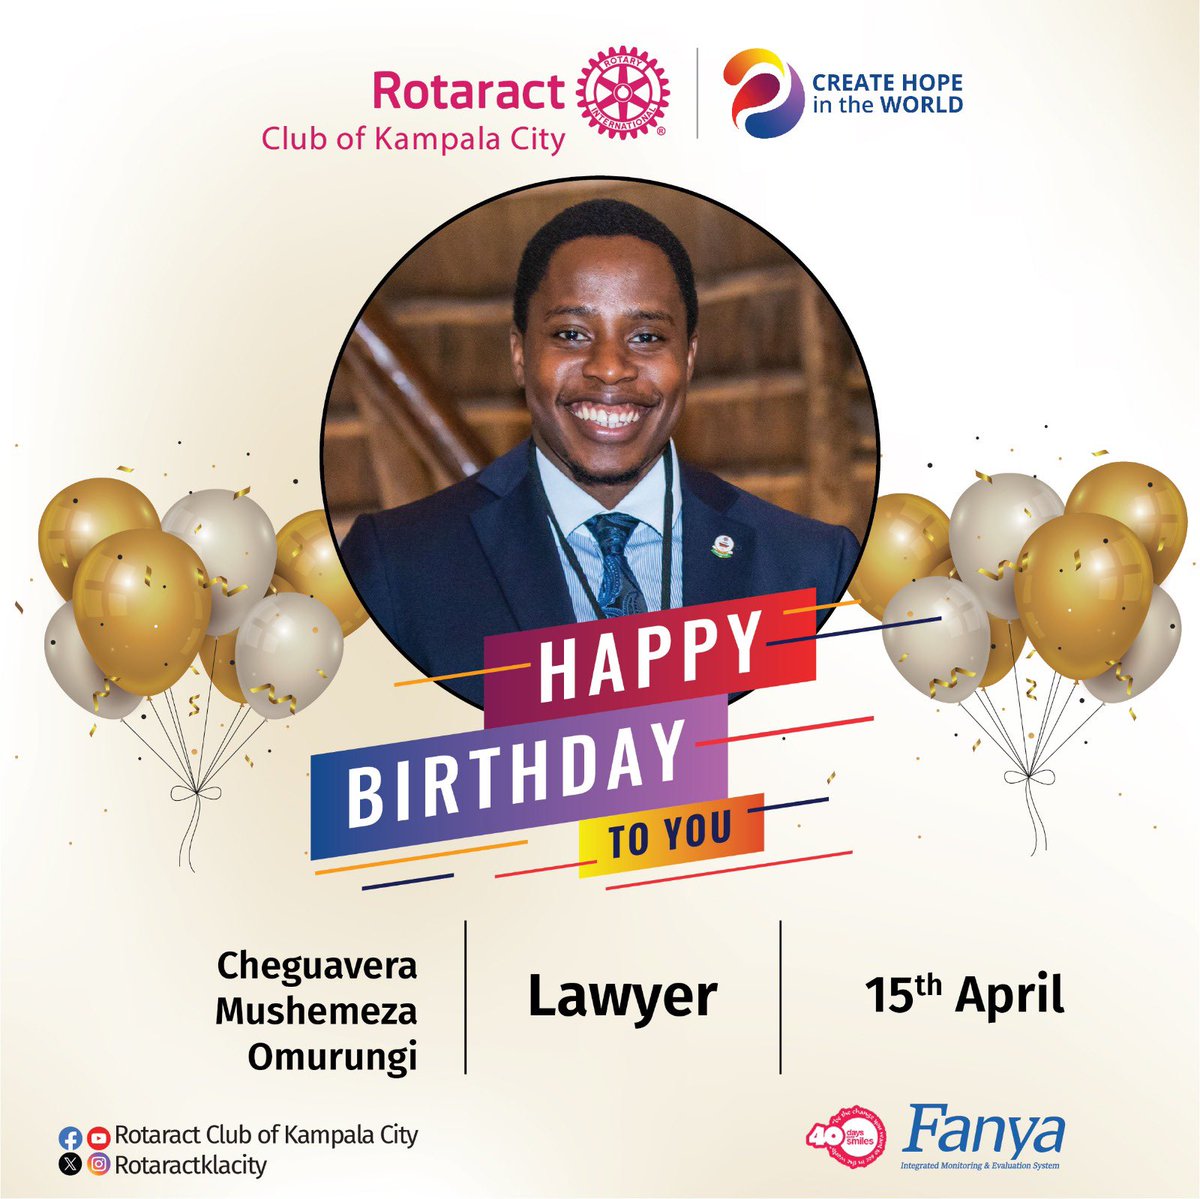 Join us in celebrating PP Cheguavera a happybirthday 🎂 May your day be filled with joy, laughter, and the warmest of blessings. Here’s to celebrating you and all the wonderful contributions you’ve made. #rotaractklacity #happybirthday